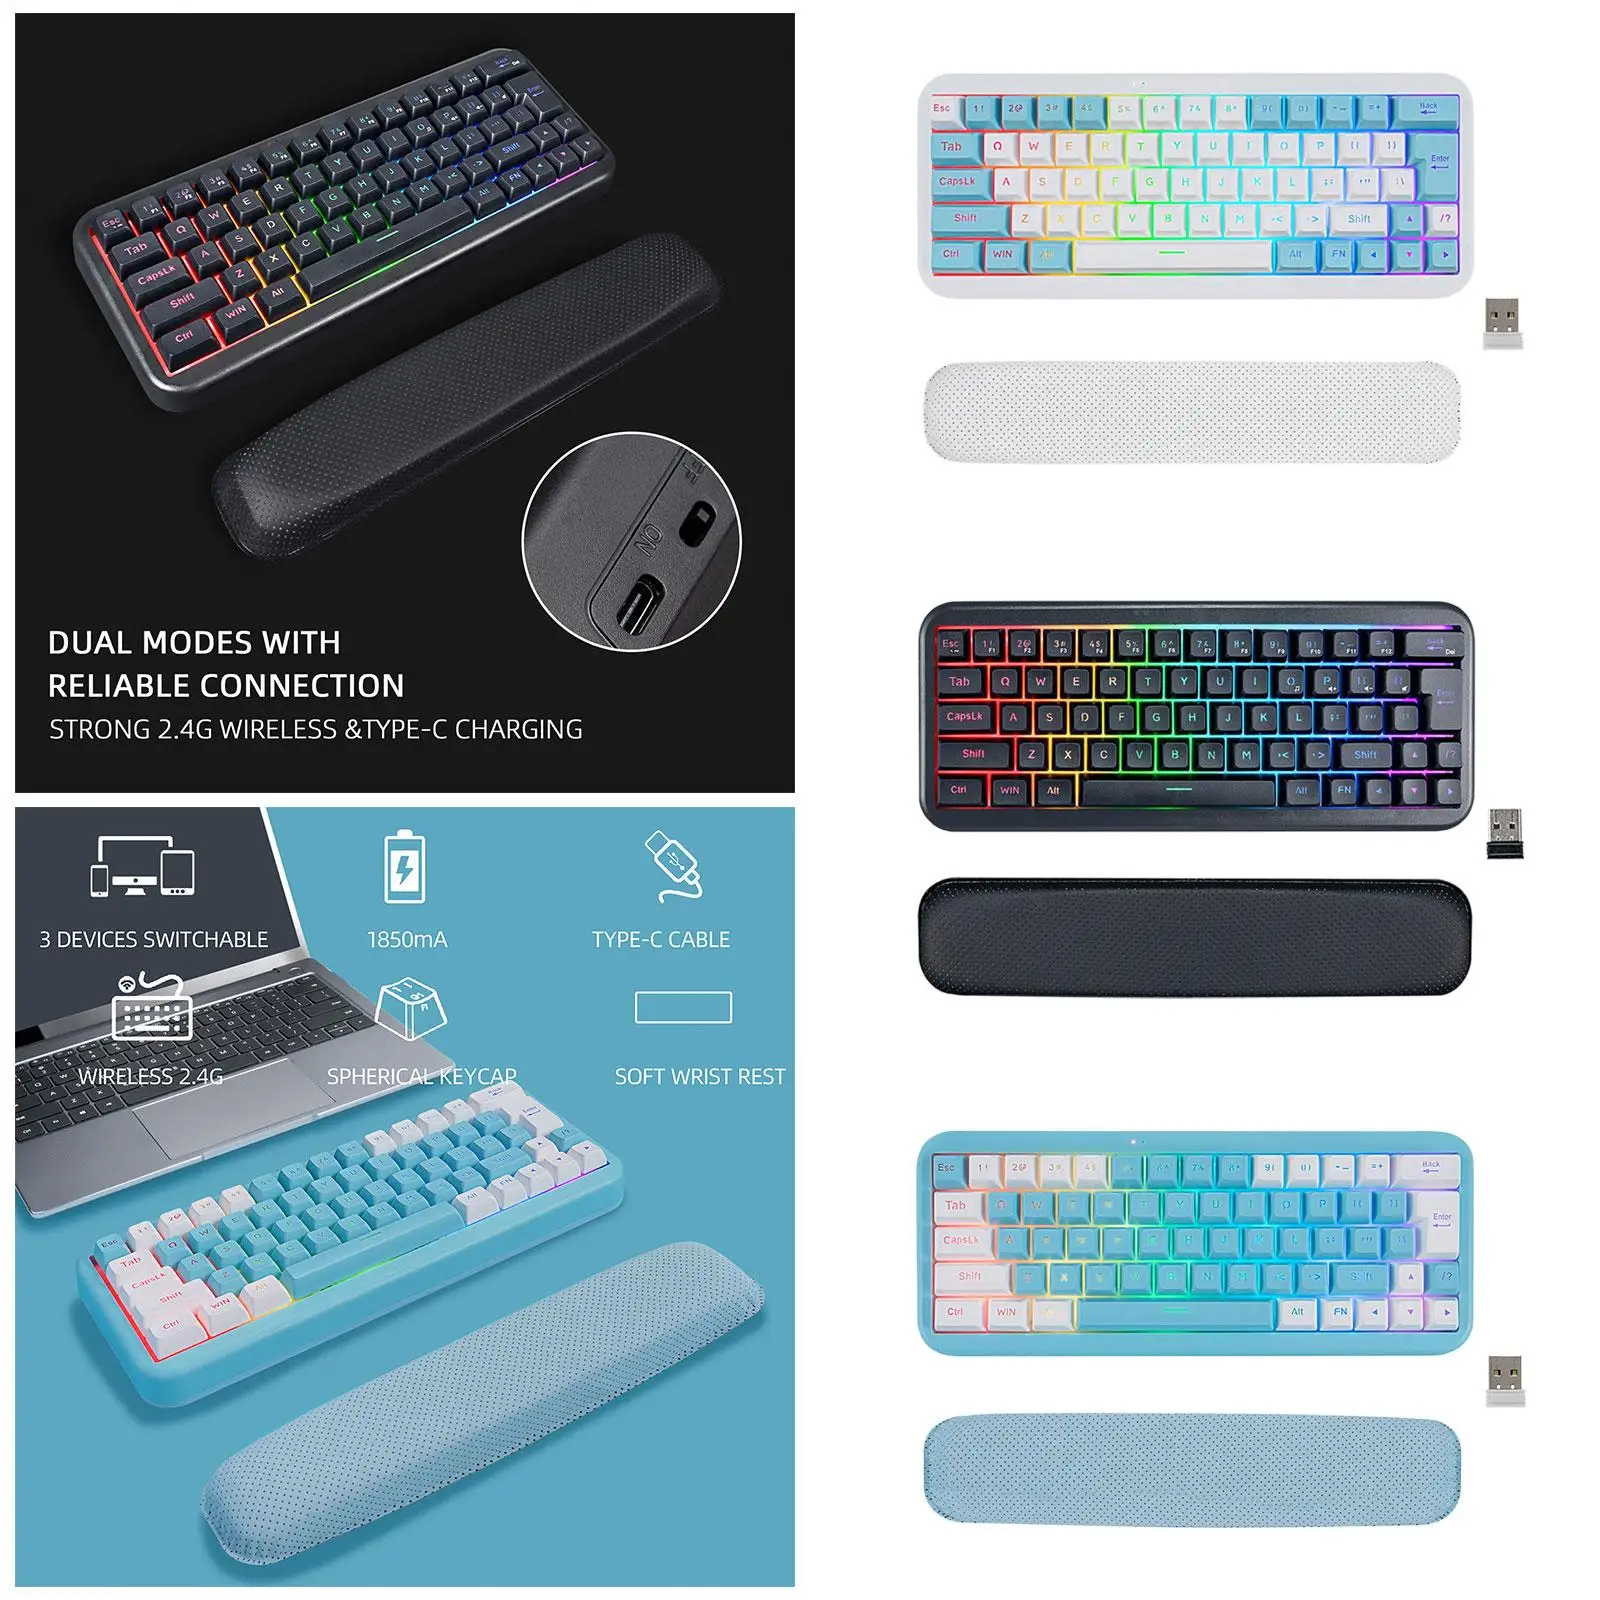   Keyboard W/ Wrist  6 Backlit plug  Rechargeable 1850mAh Full Size Compact RGB for Desktop  Office